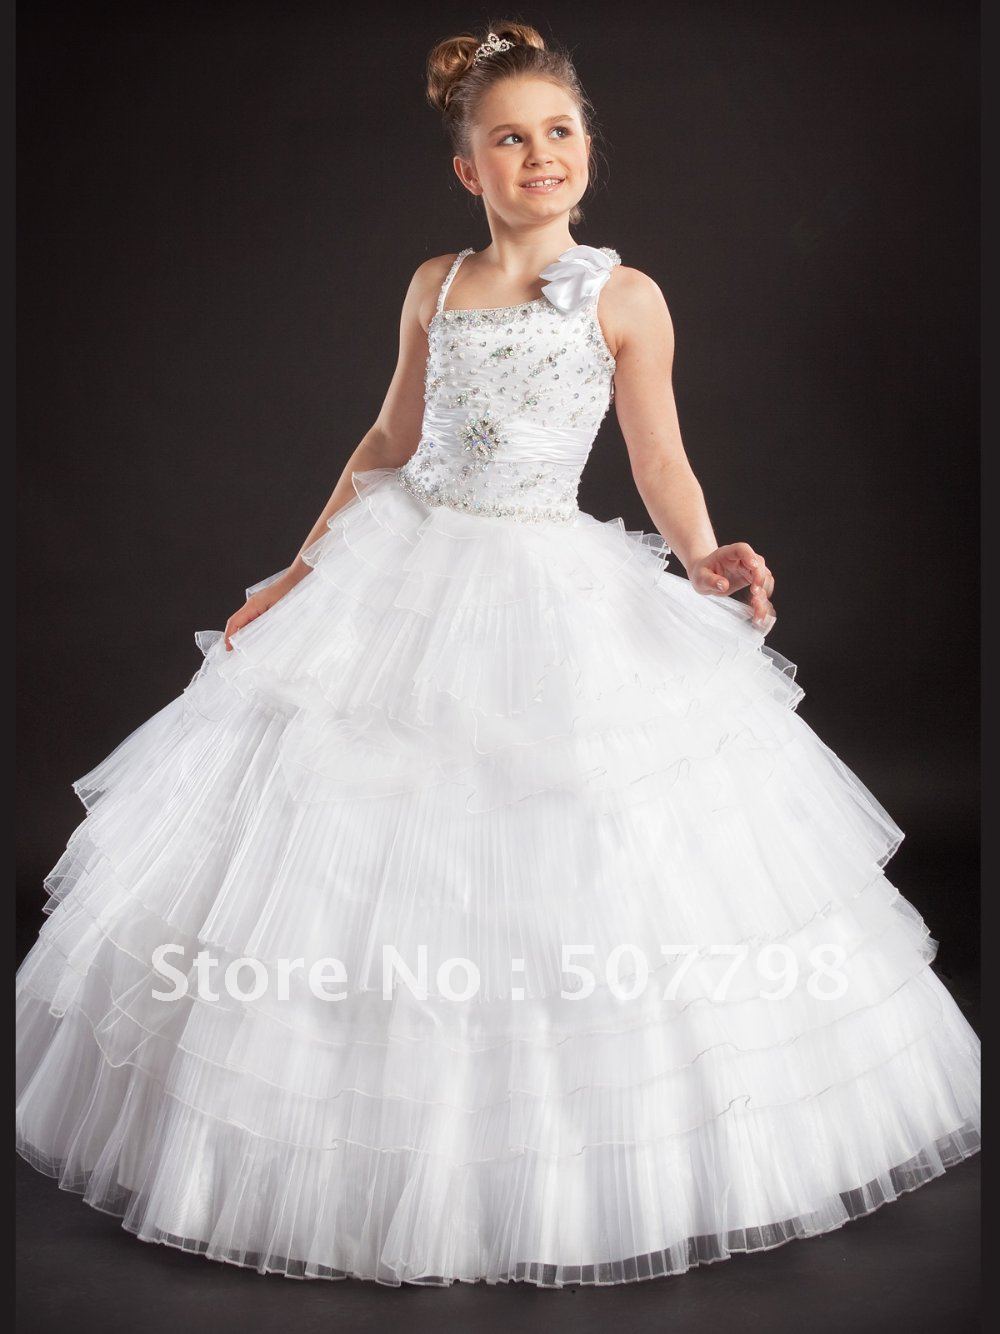 fall collection layered tulles wedding pageant dress ,6-13custom made asymmetrical shoulders dimonds children ball gown